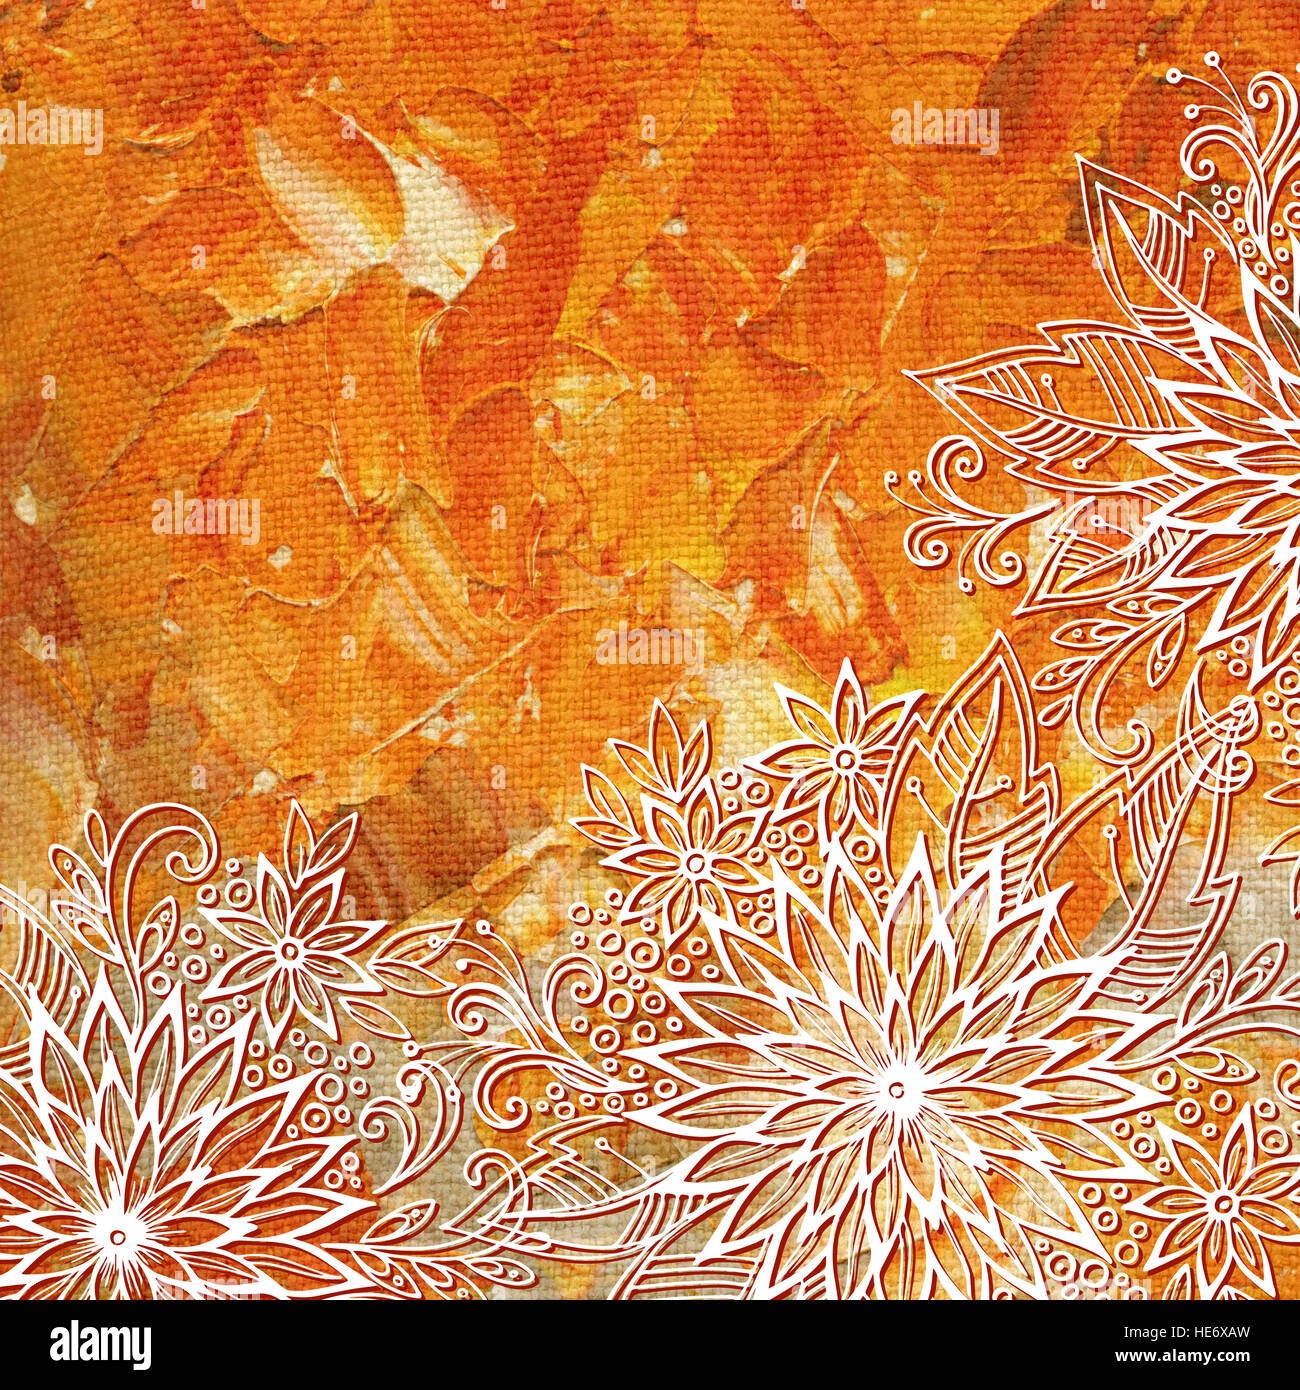 Floral Pattern on Oil Paint Painting Stock Photo